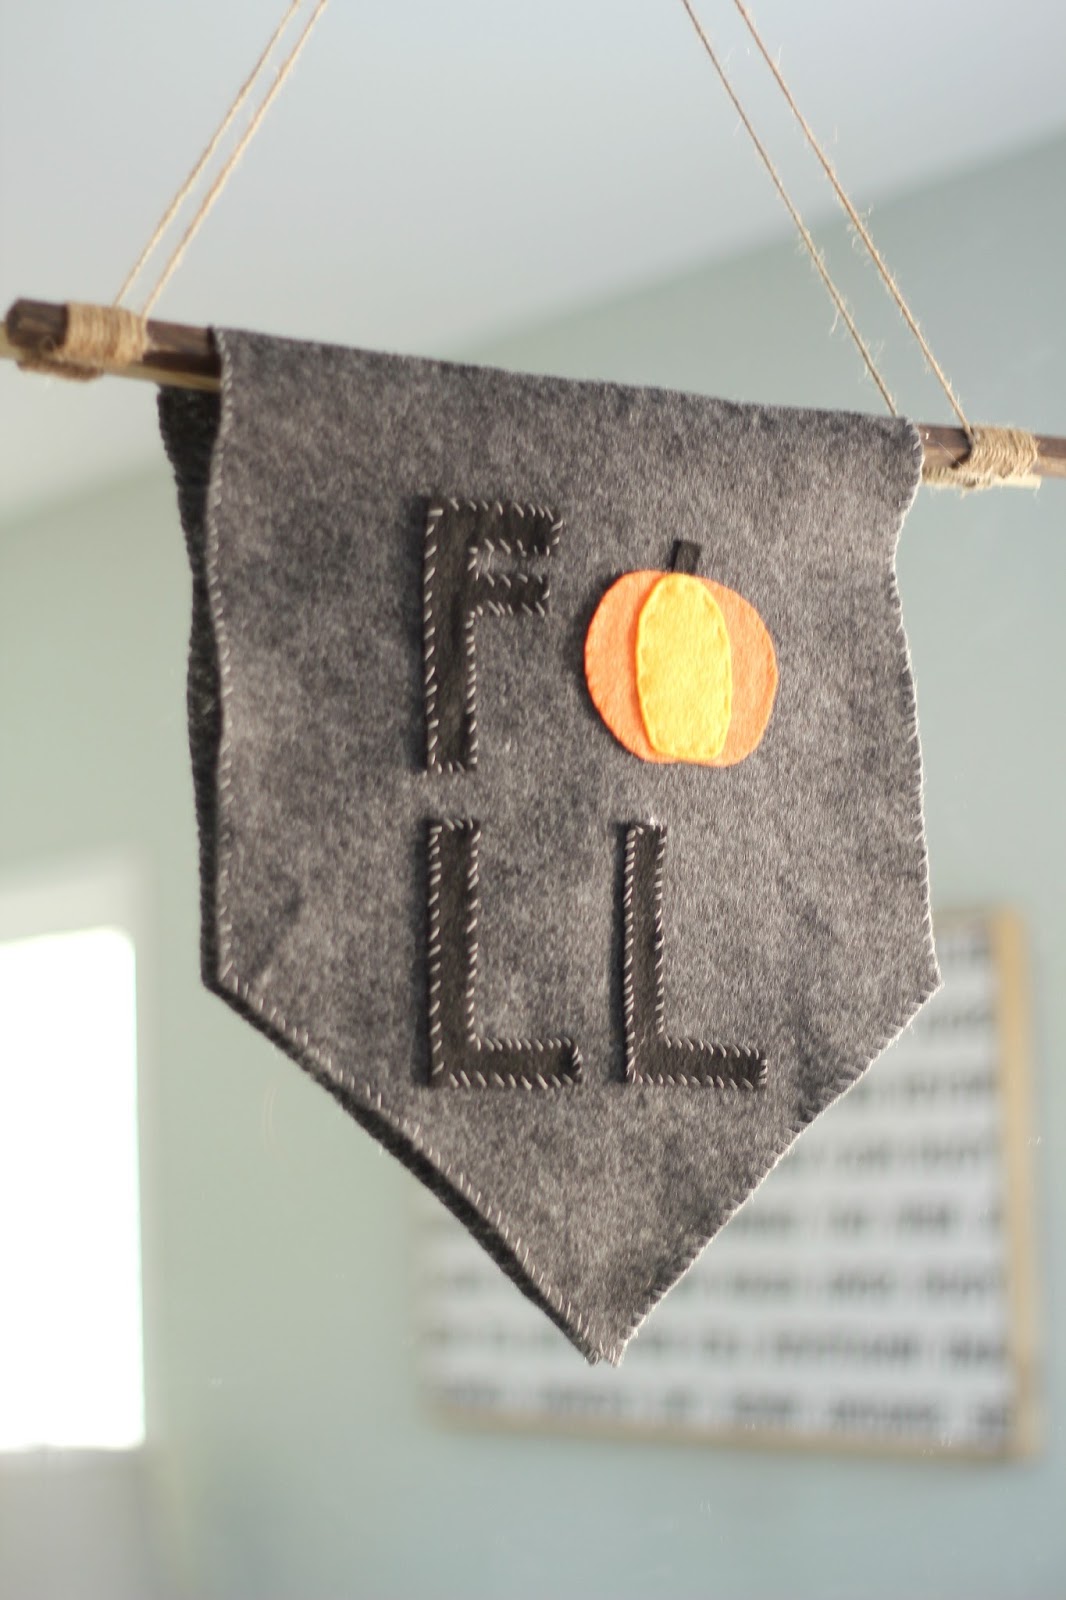 How to Make a DIY Pin Banner